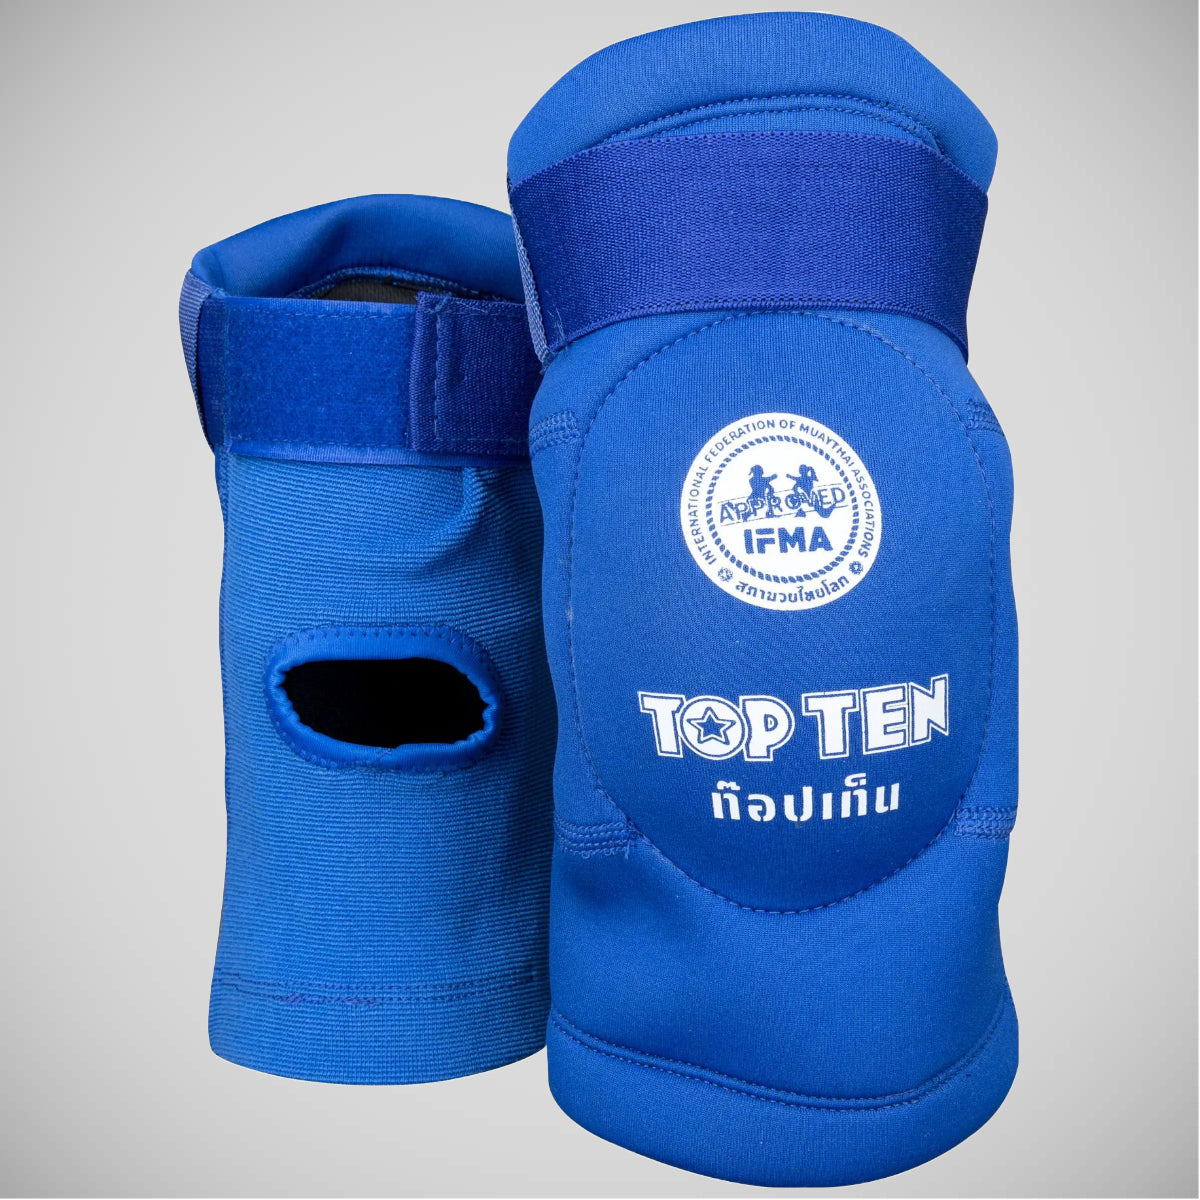 The Best Judo and BJJ Grappling Knee Pads for Sale